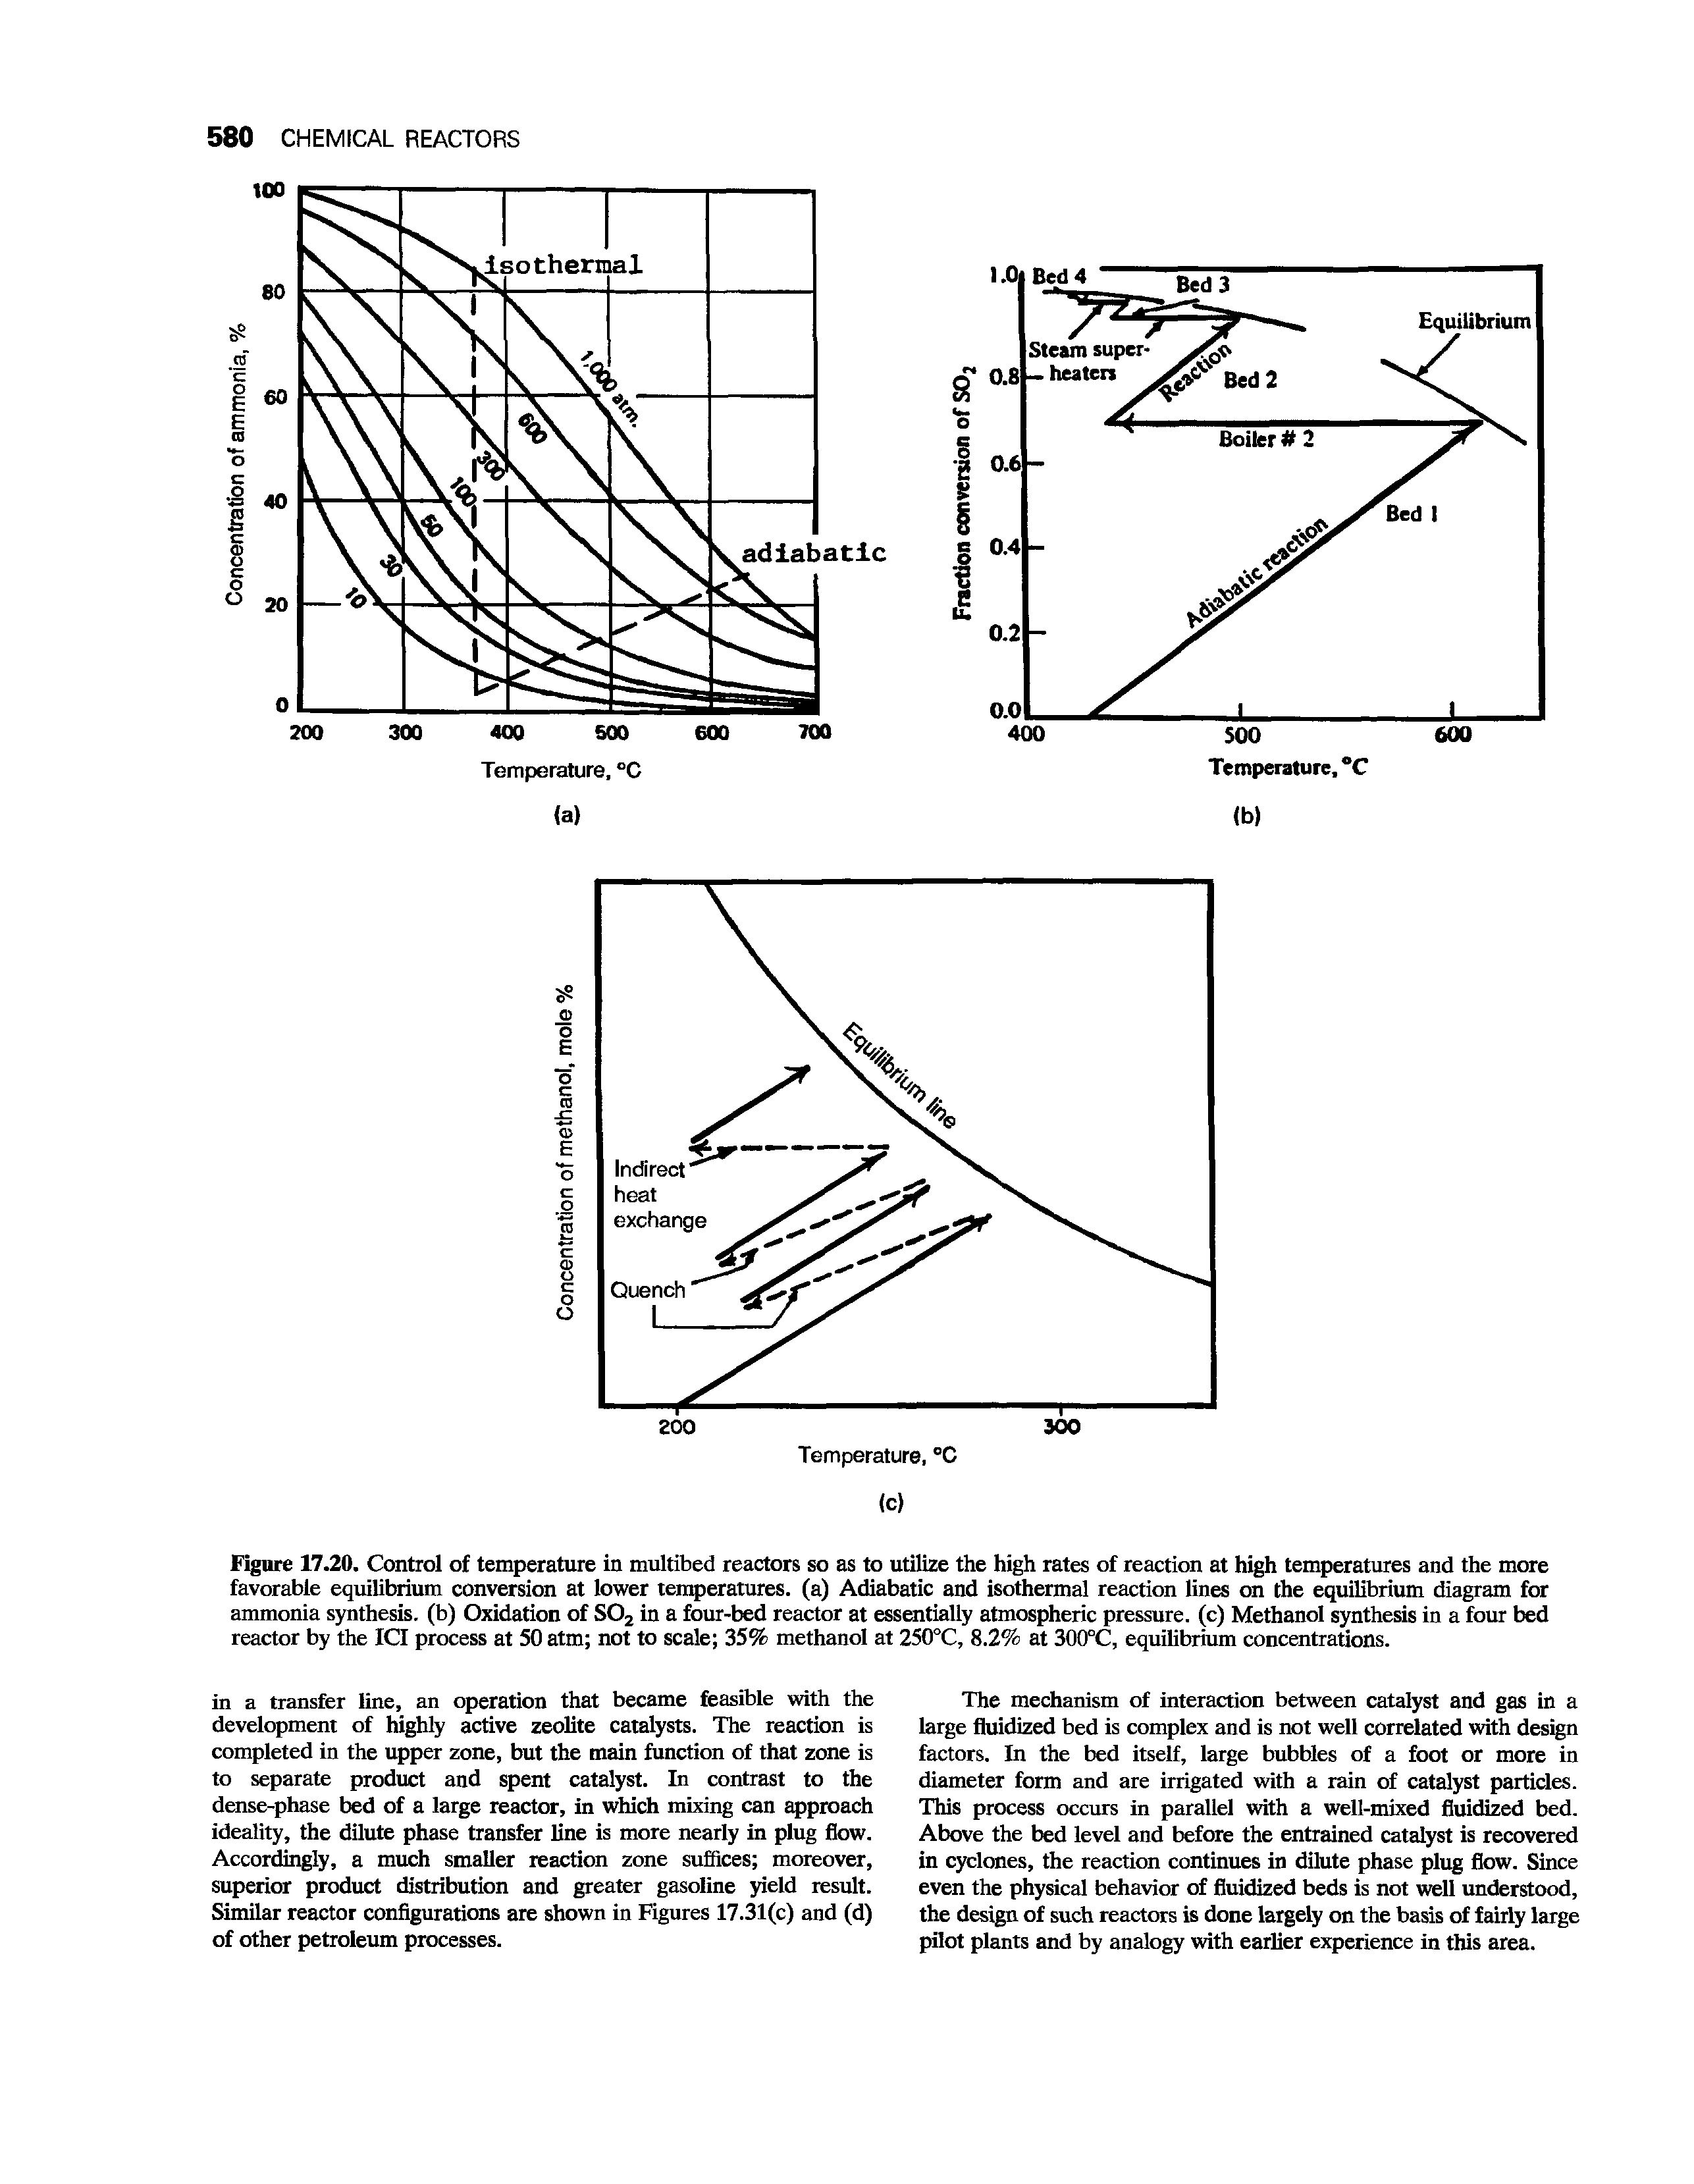 Figure 17.20. Control of temperature in multibed reactors so as to utilize the high rates of reaction at high temperatures and the more favorable equilibrium conversion at lower temperatures, (a) Adiabatic and isothermal reaction lines on the equilibrium diagram for ammonia synthesis, (b) Oxidation of SOz in a four-bed reactor at essentially atmospheric pressure, (c) Methanol synthesis in a four bed reactor by the ICI process at 50 atm not to scale 35% methanol at 250°C, 8.2% at 300°C, equilibrium concentrations.